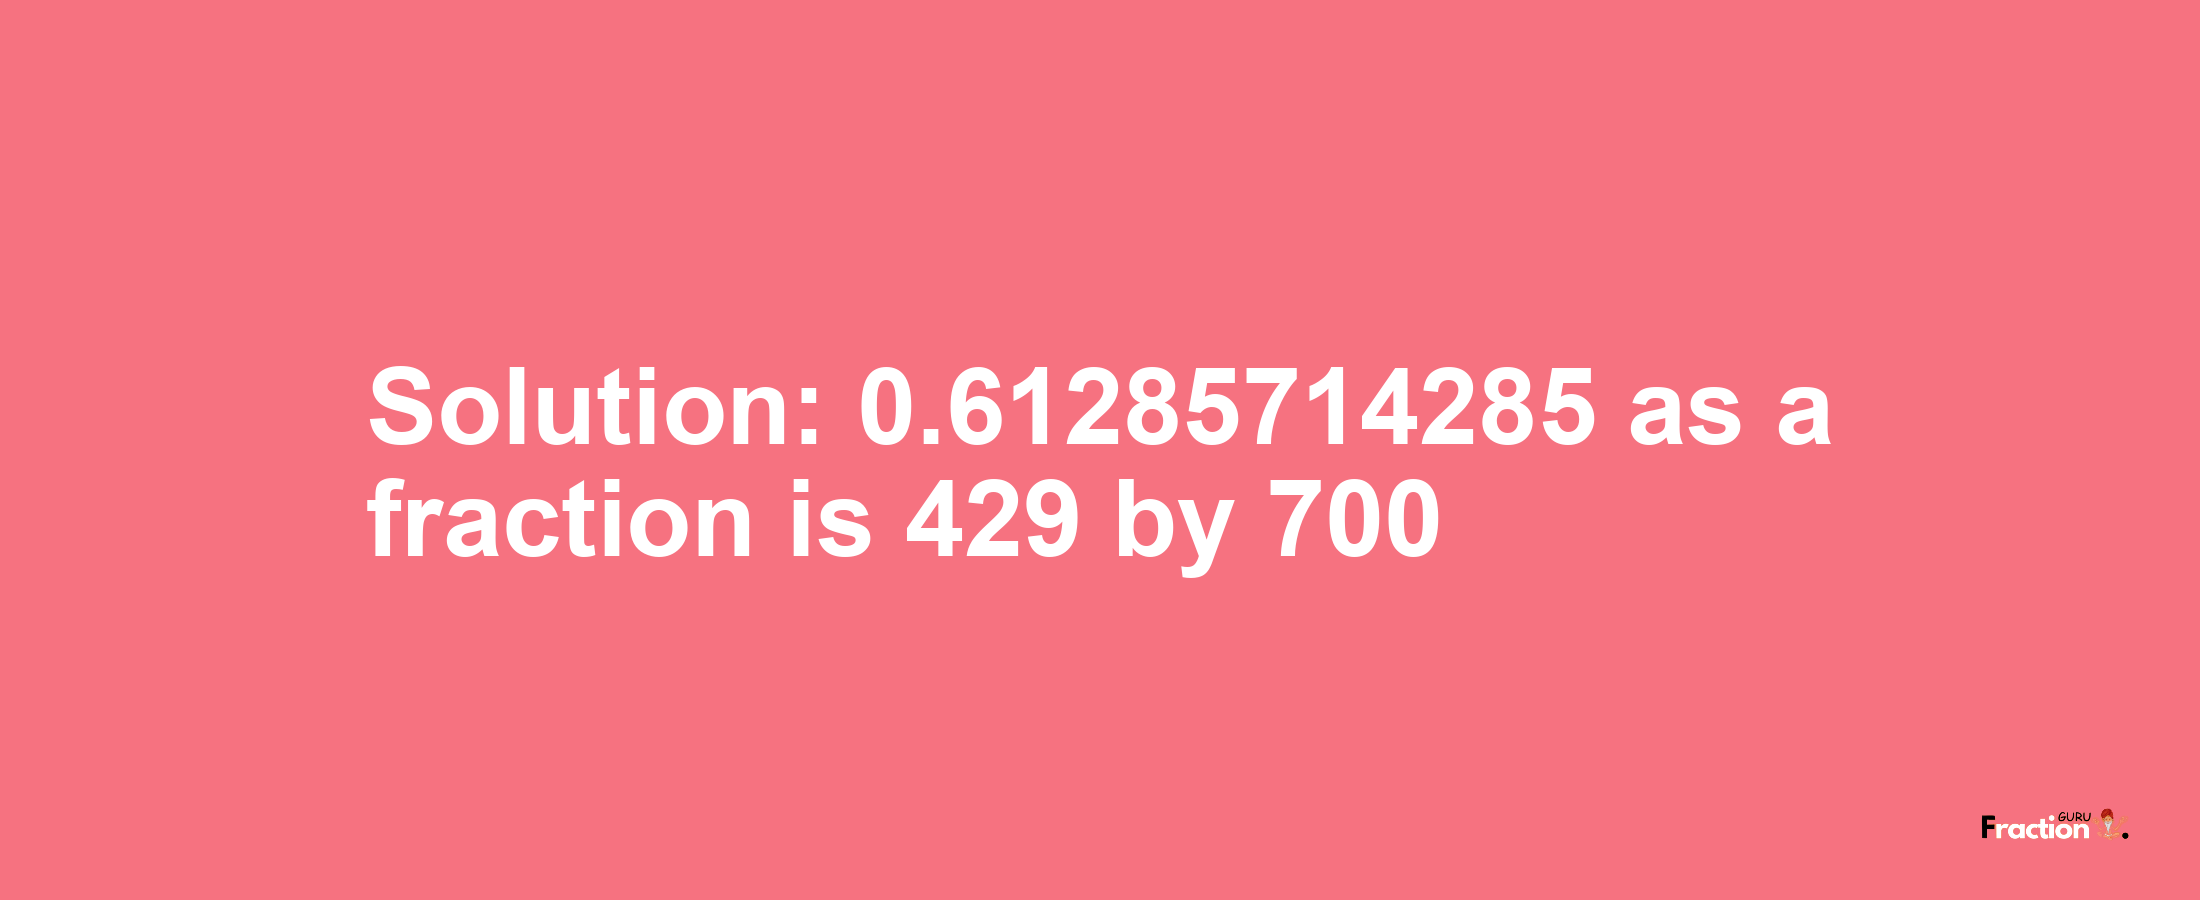 Solution:0.61285714285 as a fraction is 429/700